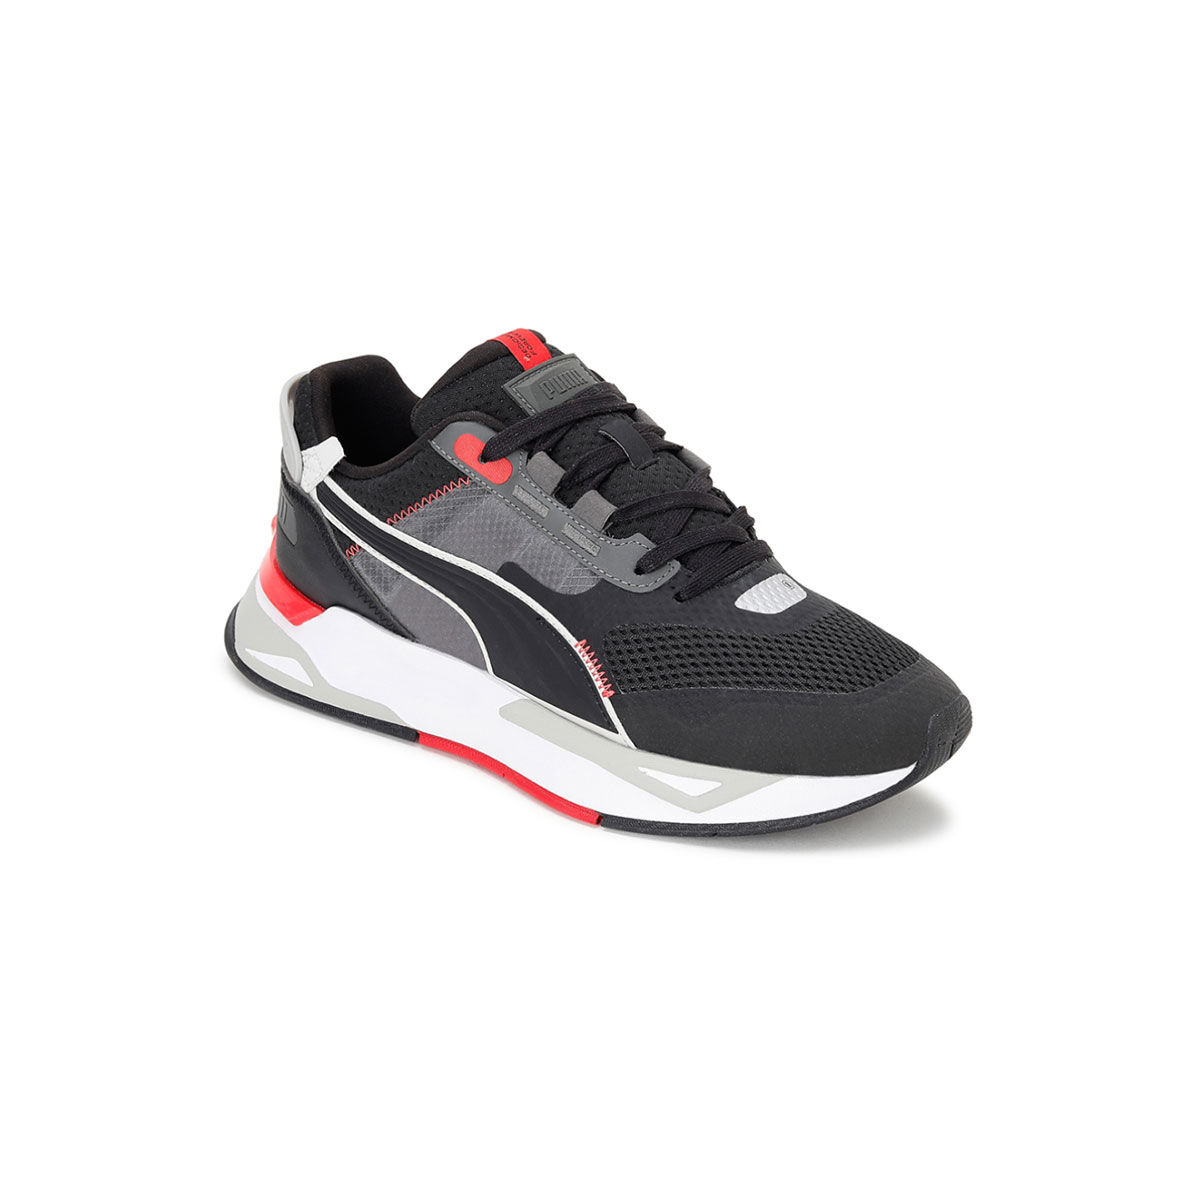 Puma Mirage Sport Tech Black Casual Sneakers: Buy Puma Mirage Sport Tech  Black Casual Sneakers Online at Best Price in India | Nykaa